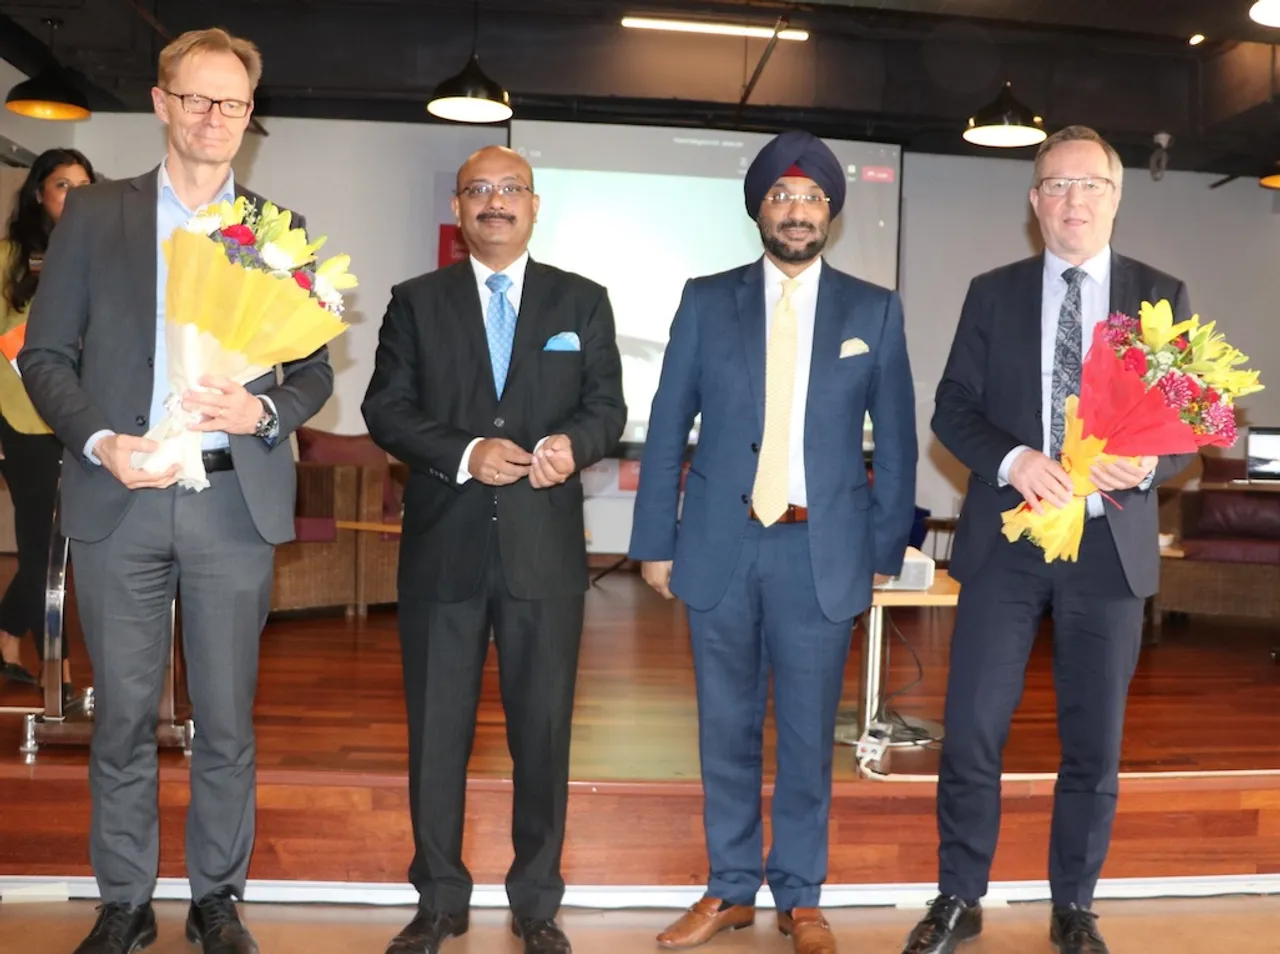 Mr. Mika Lintila, Minister of Economic Affairs of Finland; Harshvendra Soin, Global Chief People Officer & Head - Marketing, Tech Mahindra; Jagdish Mitra, Chief Strategy Officer, Tech Mahindra; Mr. Petri Peltonen, Under-Secretary of State, Ministry of Economic Affairs and Employment of Finland